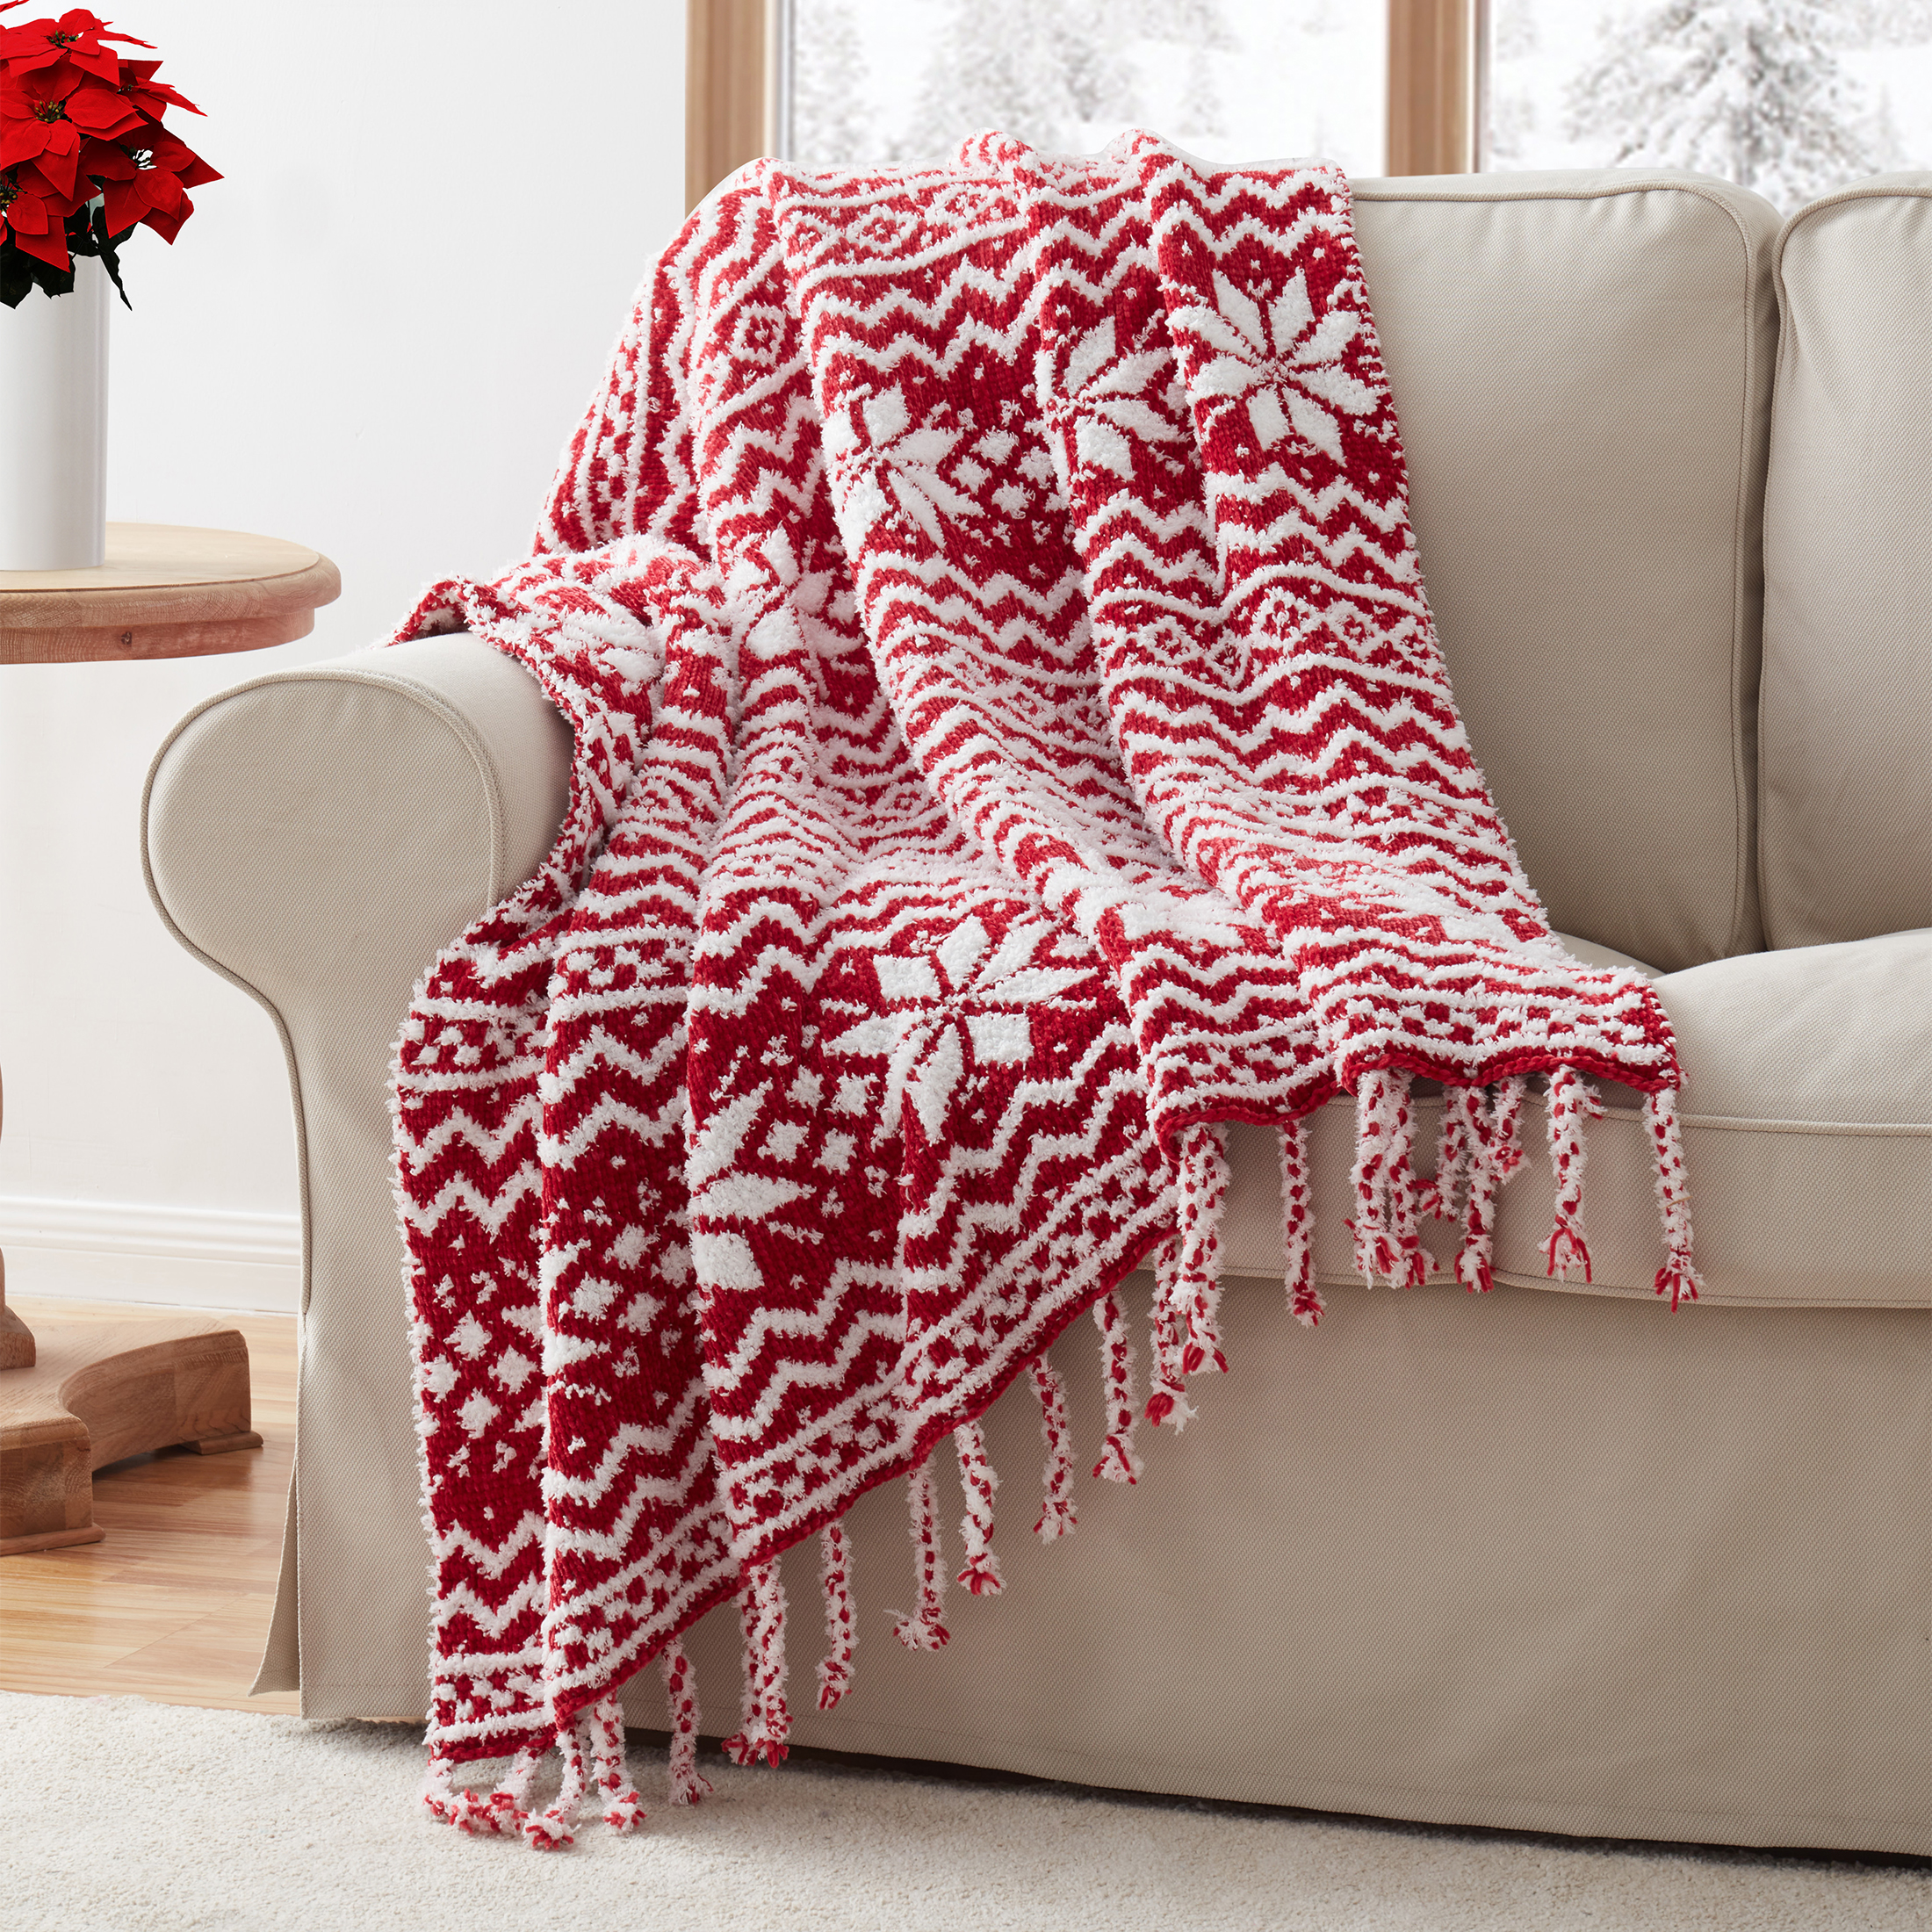 My Texas House Aspen Chenille Throw Blanket, Red, Standard Throw - image 6 of 6